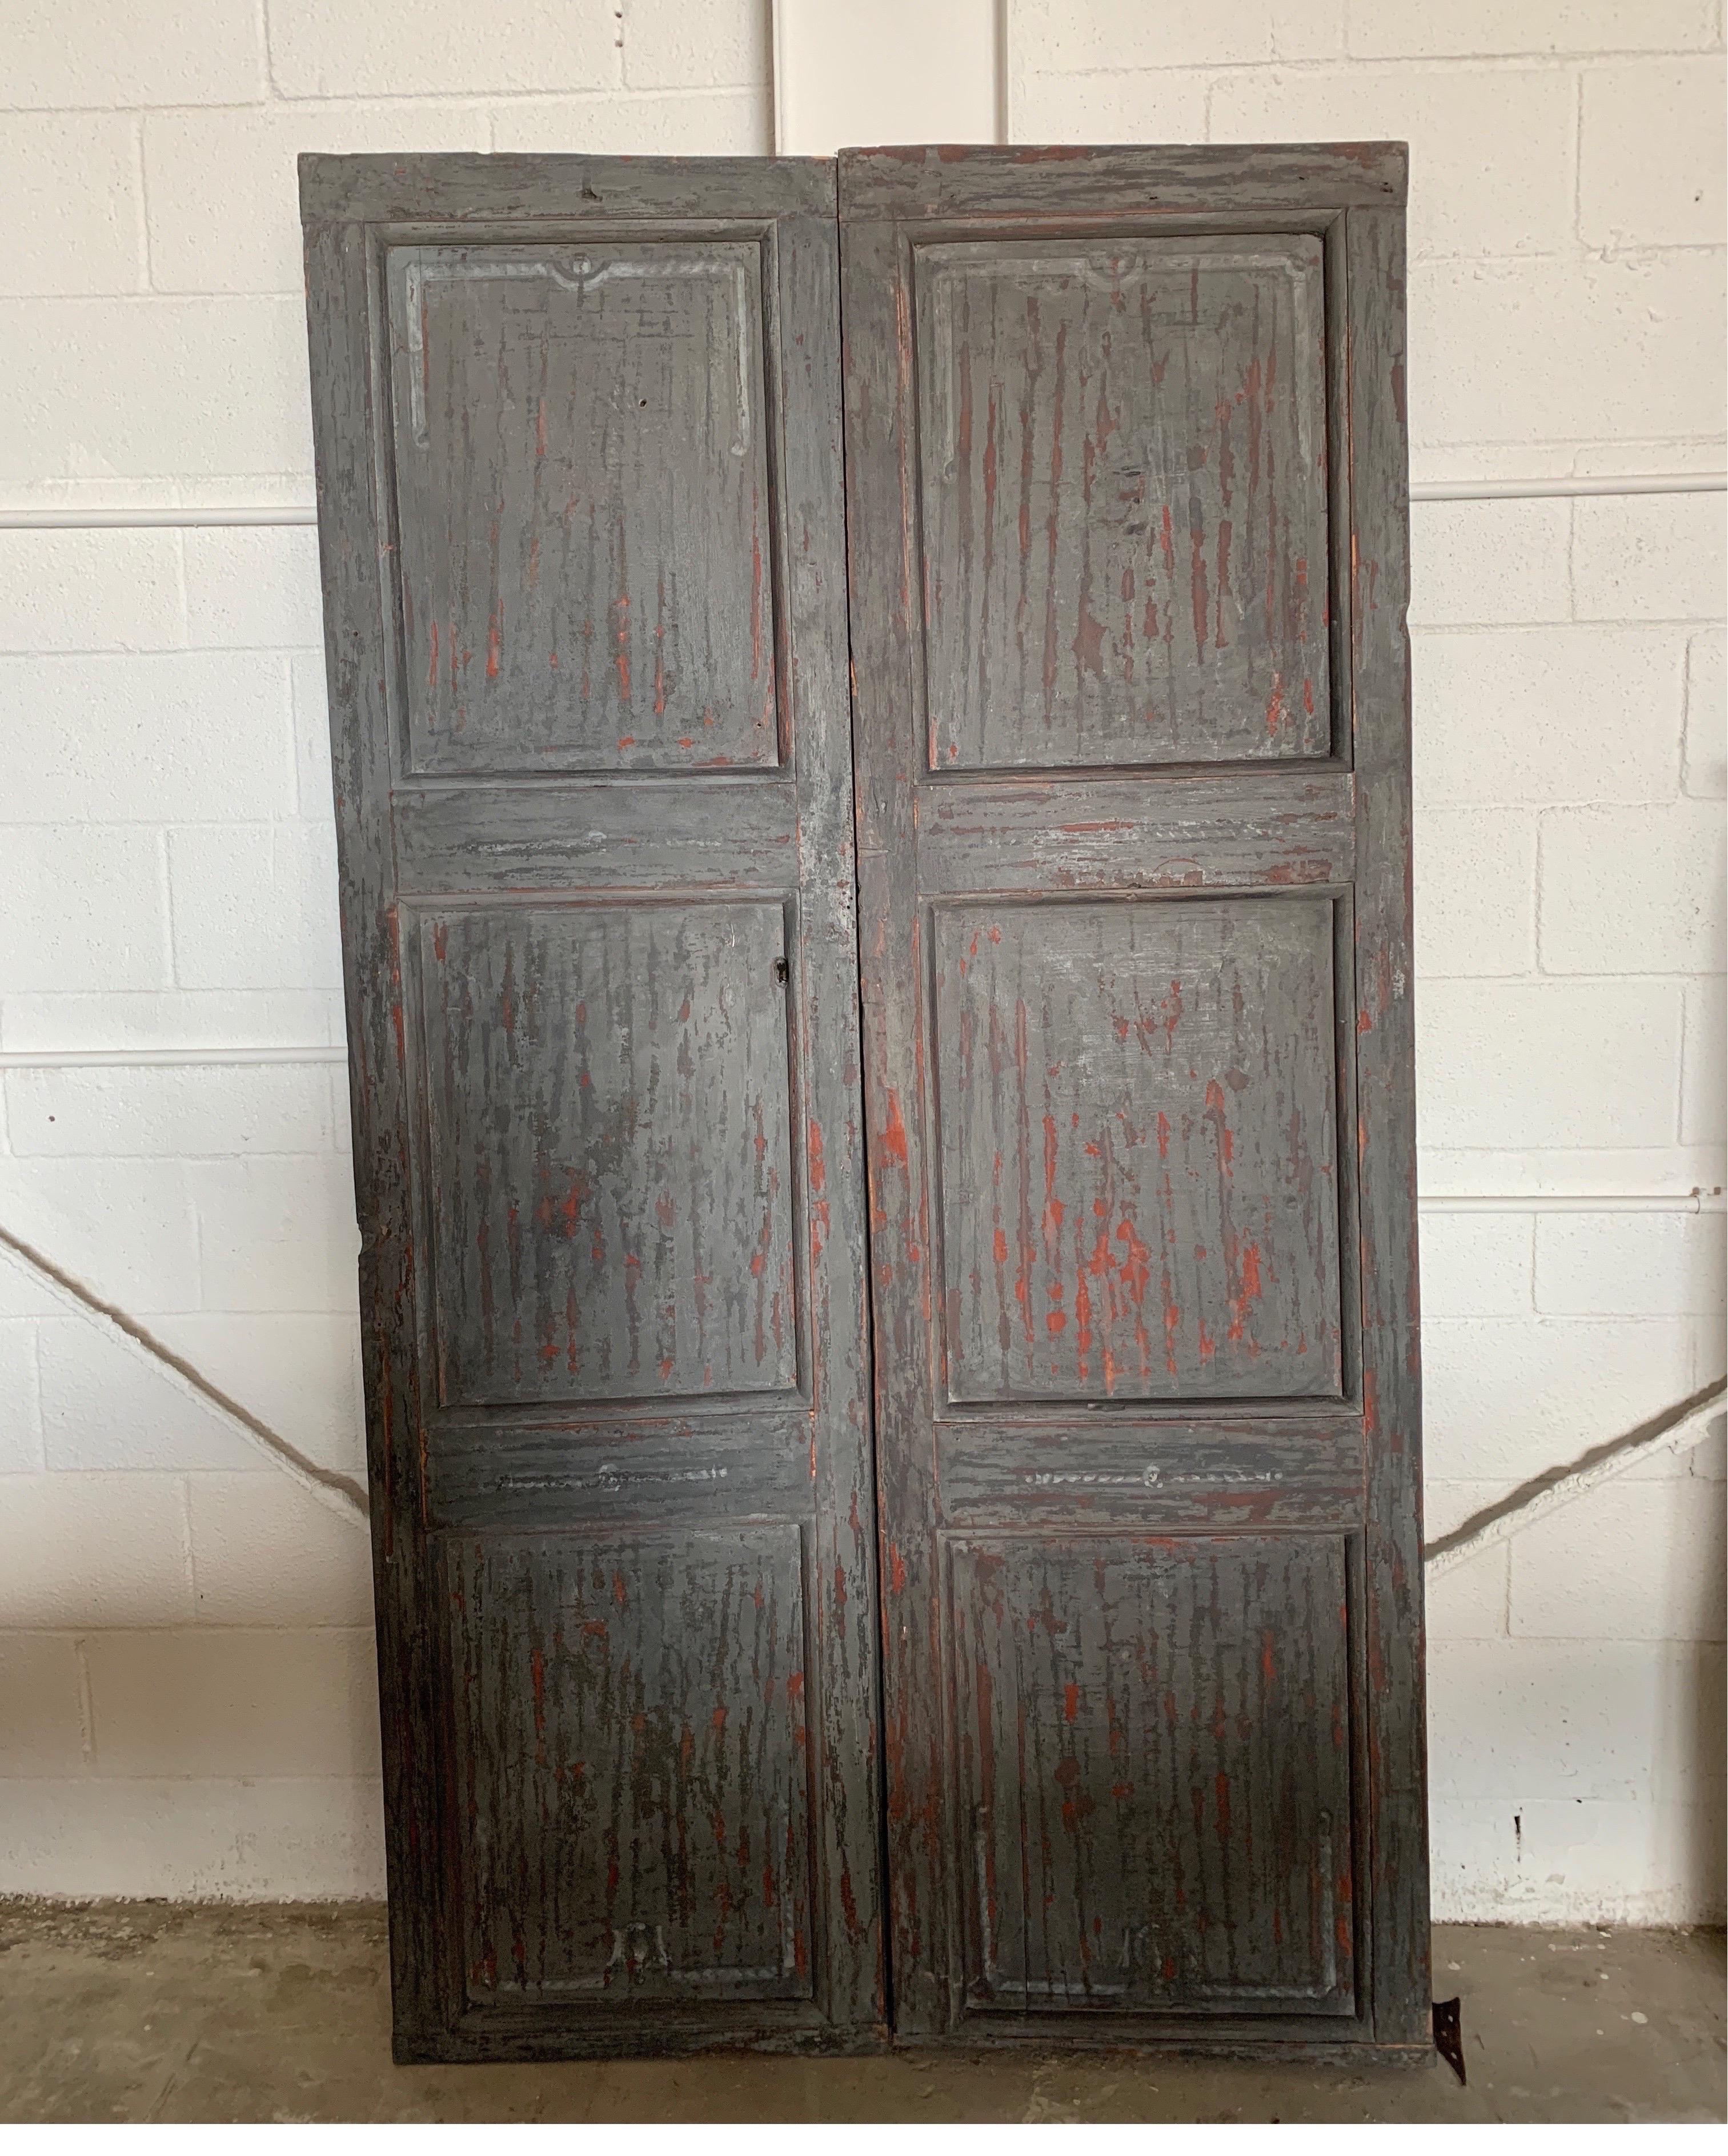 These rustic doors from the 1700s in Spain are a beautiful color of gray, black and rust. They have the original hardware and are nicely painted with detail on front. The backs are just as nice where the hardware shows.